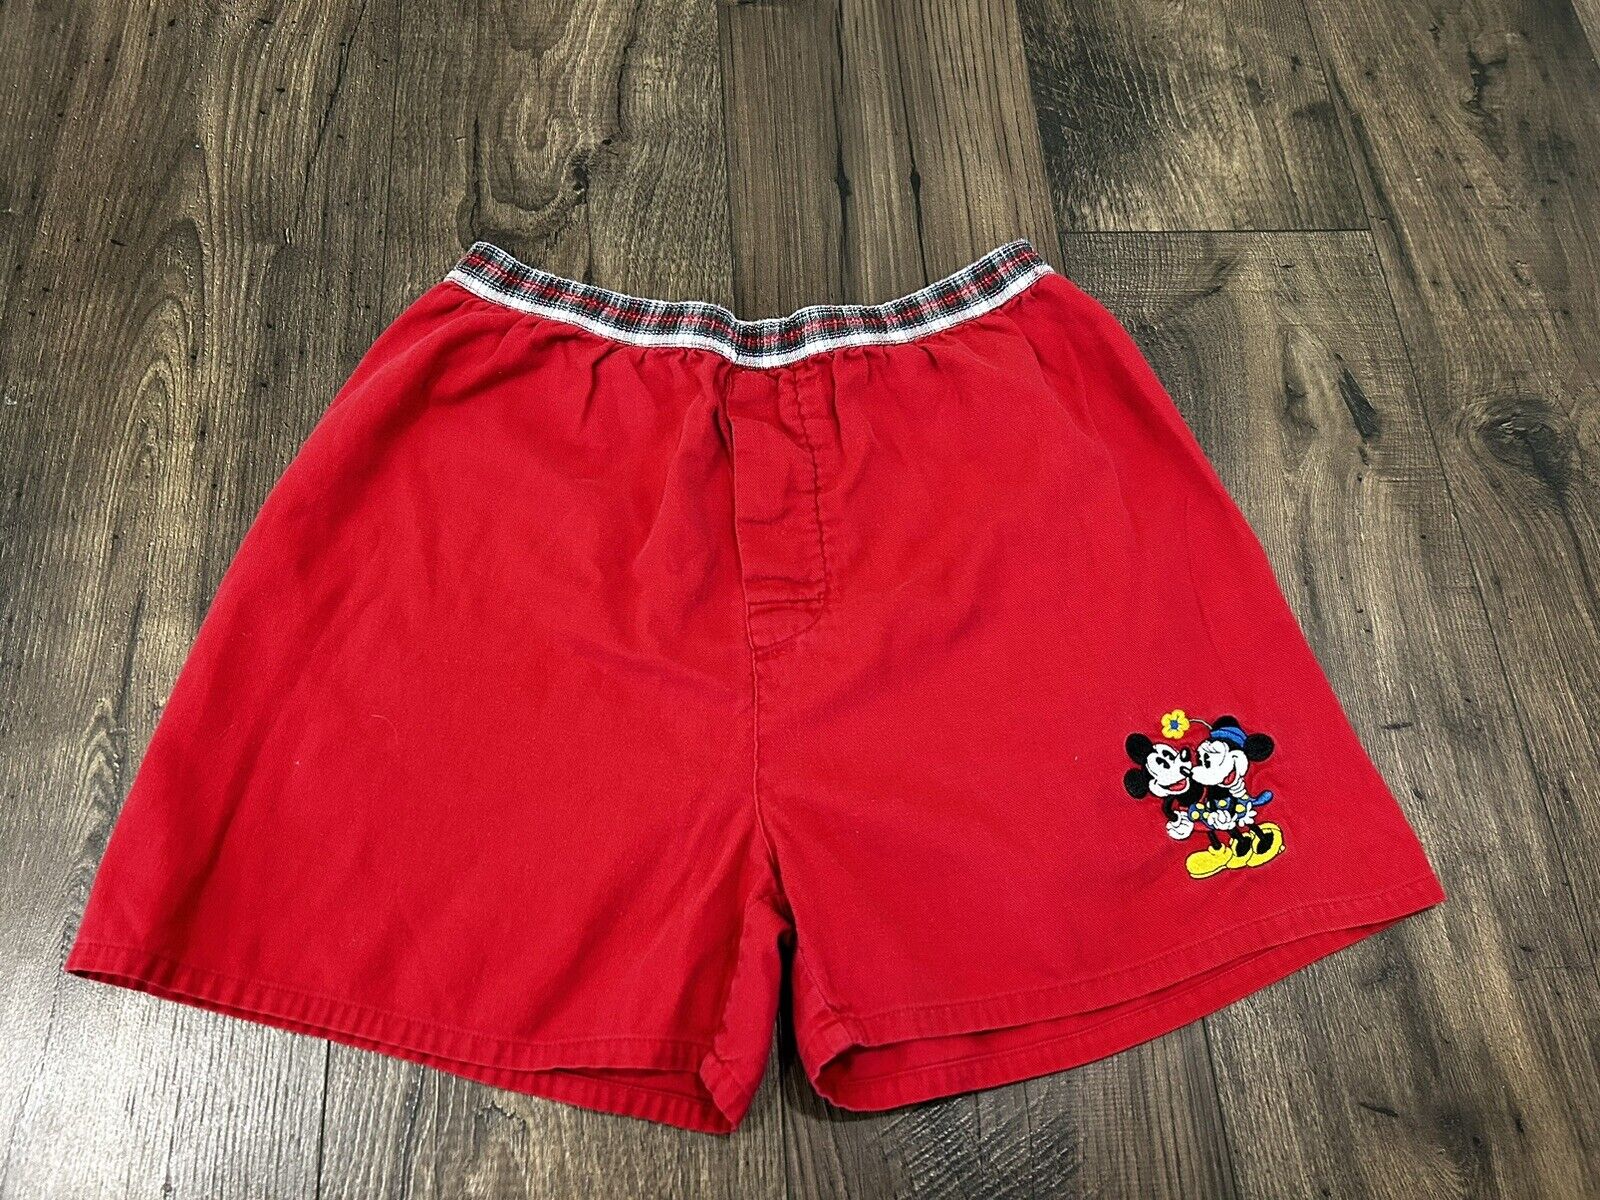 VNTG The Disney Store Vintage Mickey Minnie Mouse Embroidered Shorts Size Large